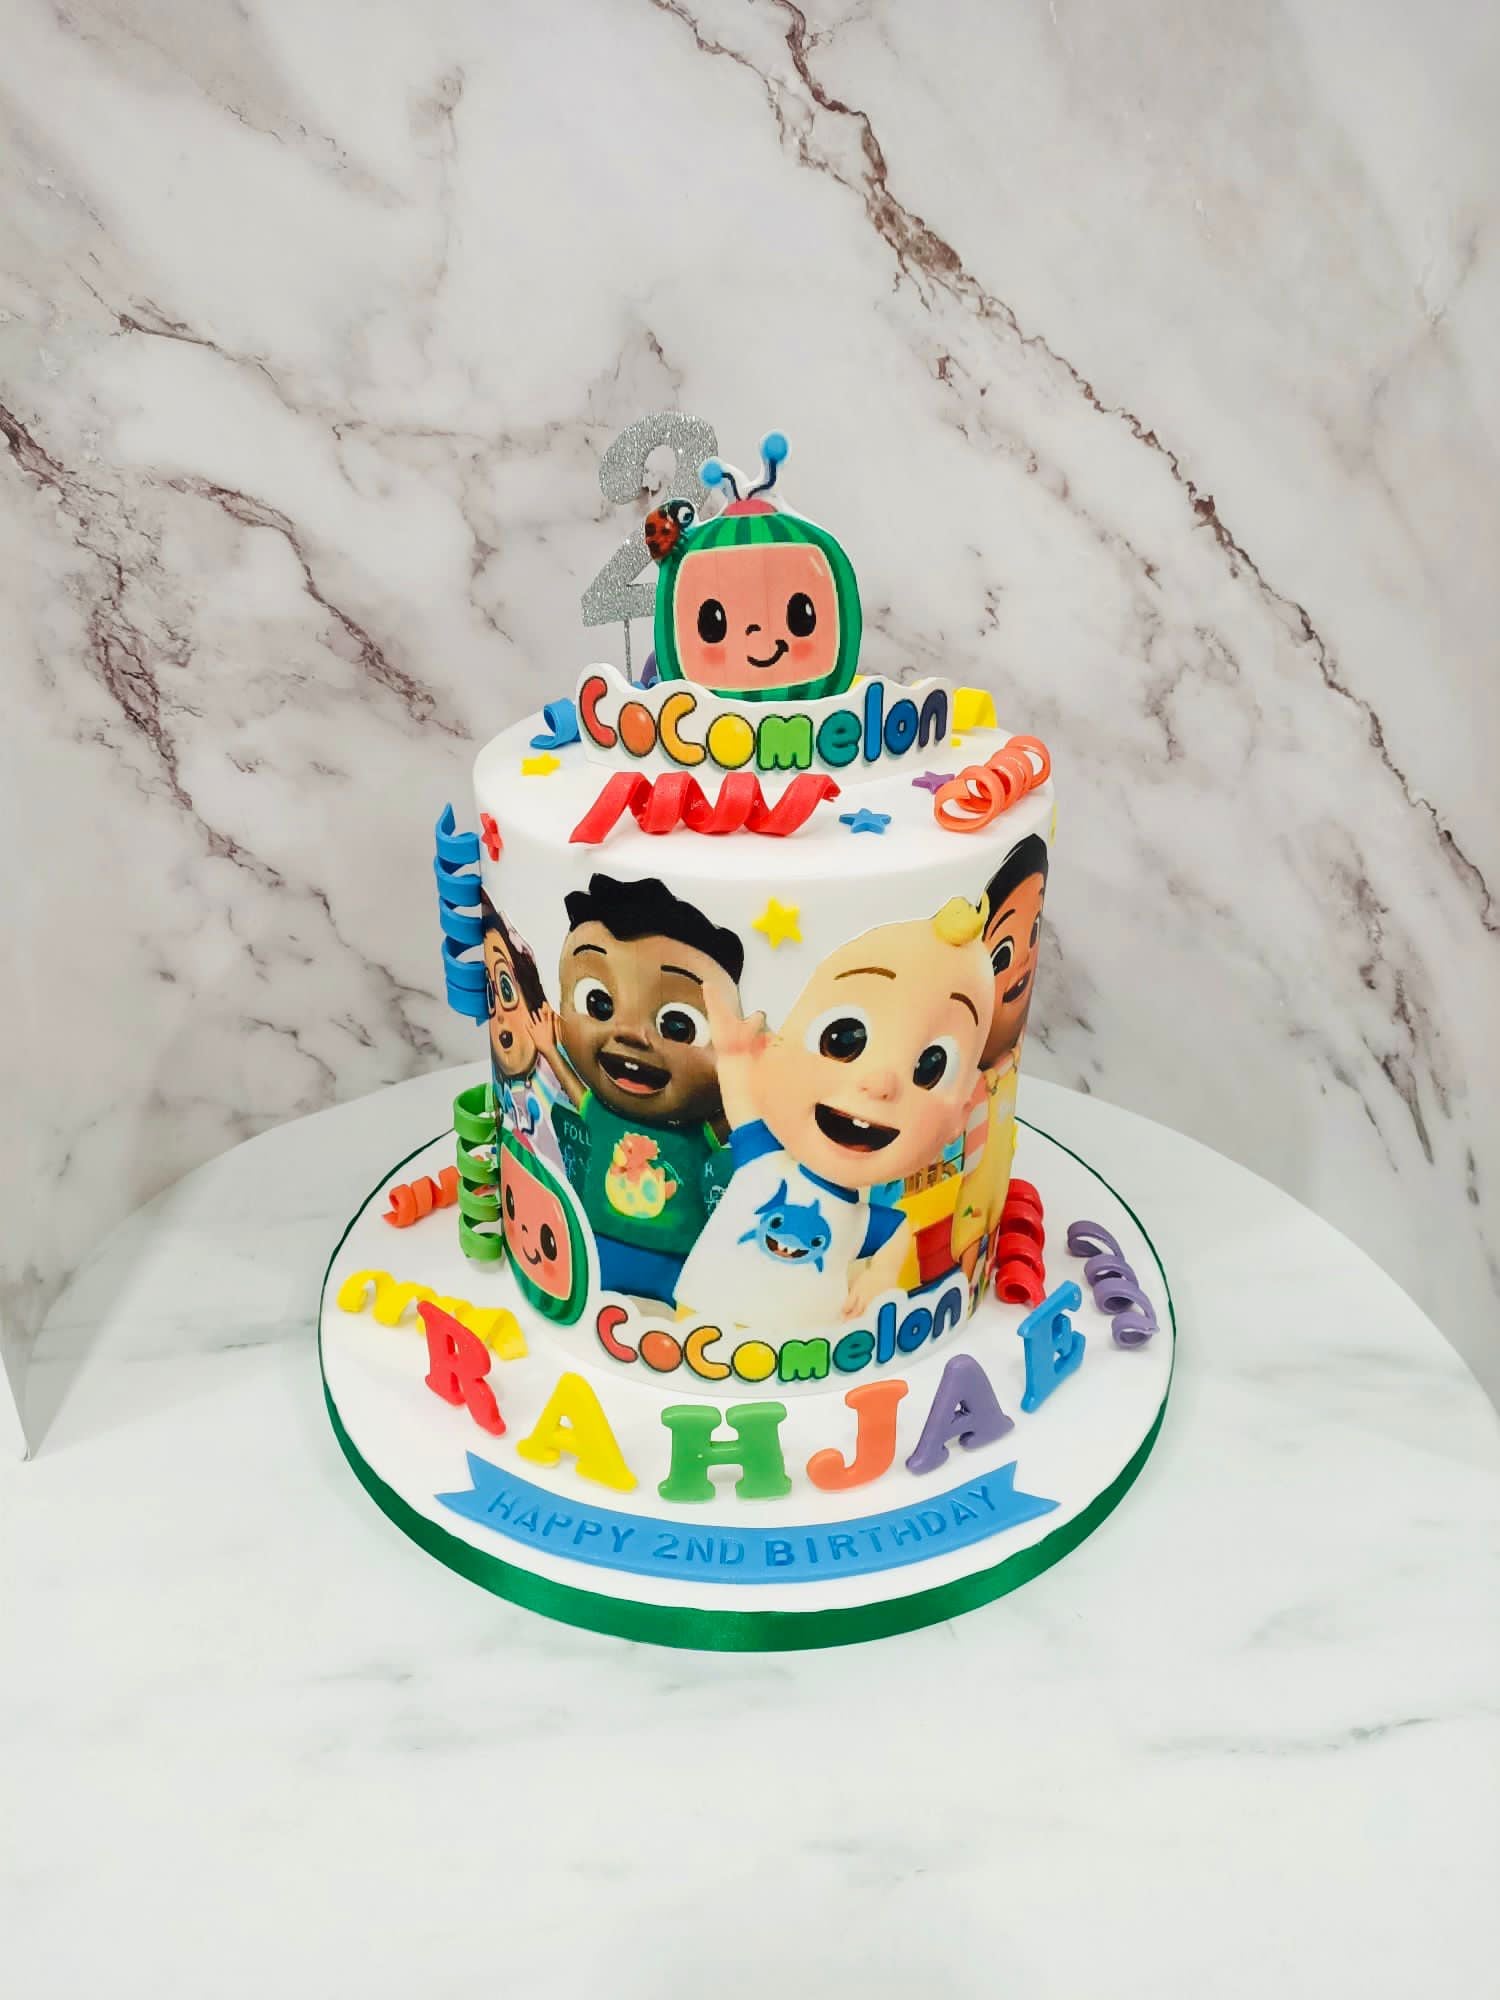 Kids Character Birthday Cakes | Claygate, Surrey | Afternoon Crumbs